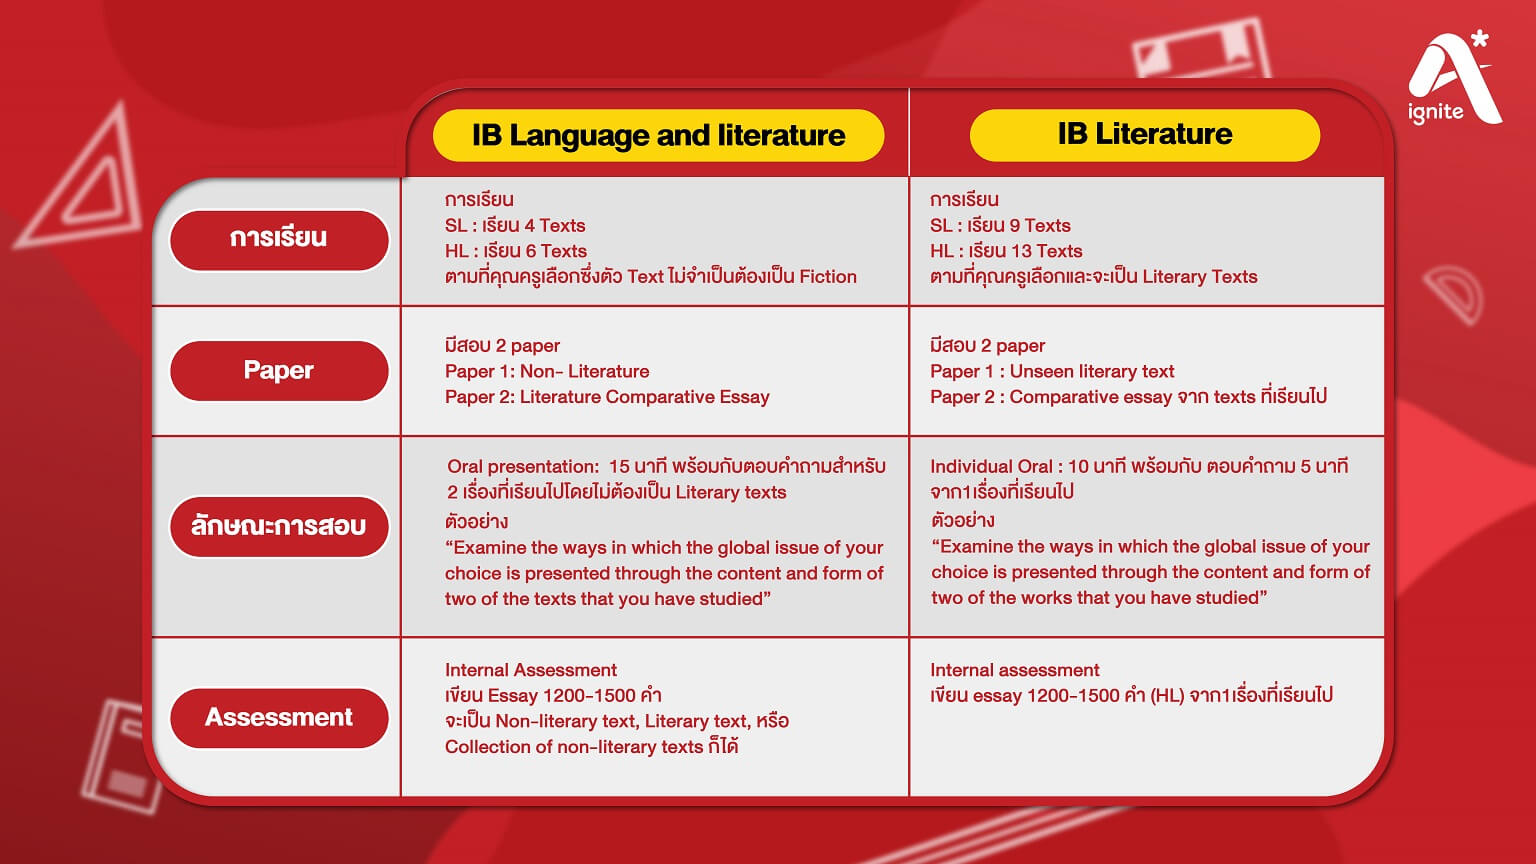 IB languages and literature information by Ignite A*.